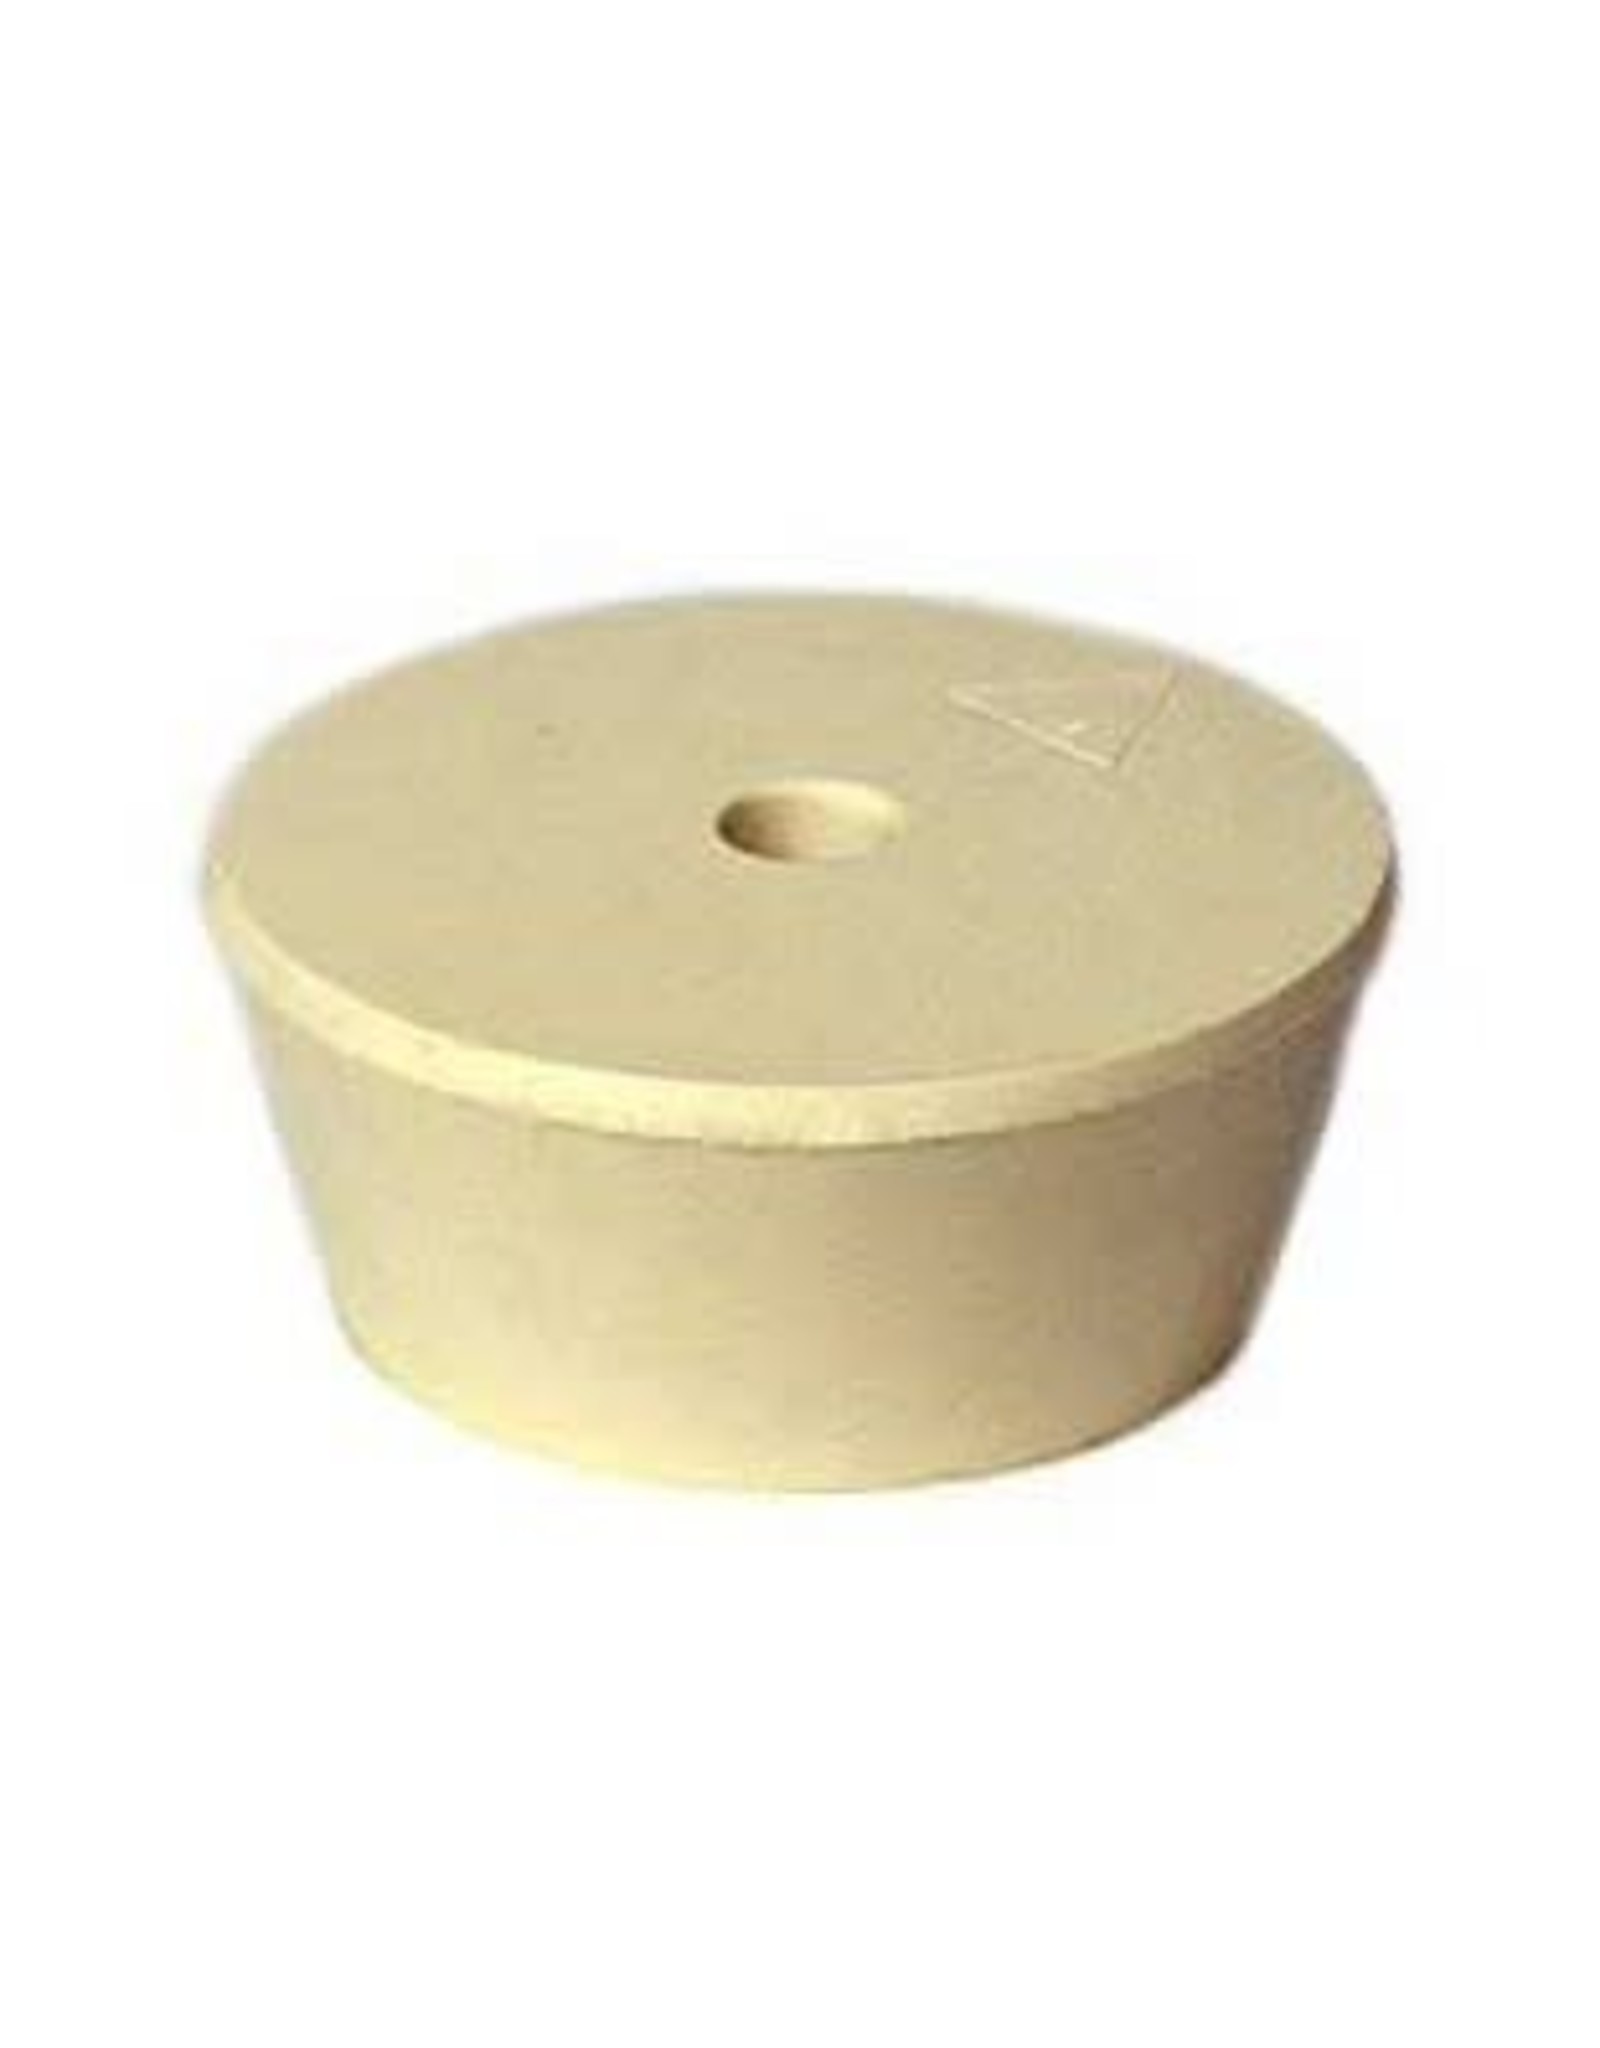 #12 SOLID RUBBER STOPPER